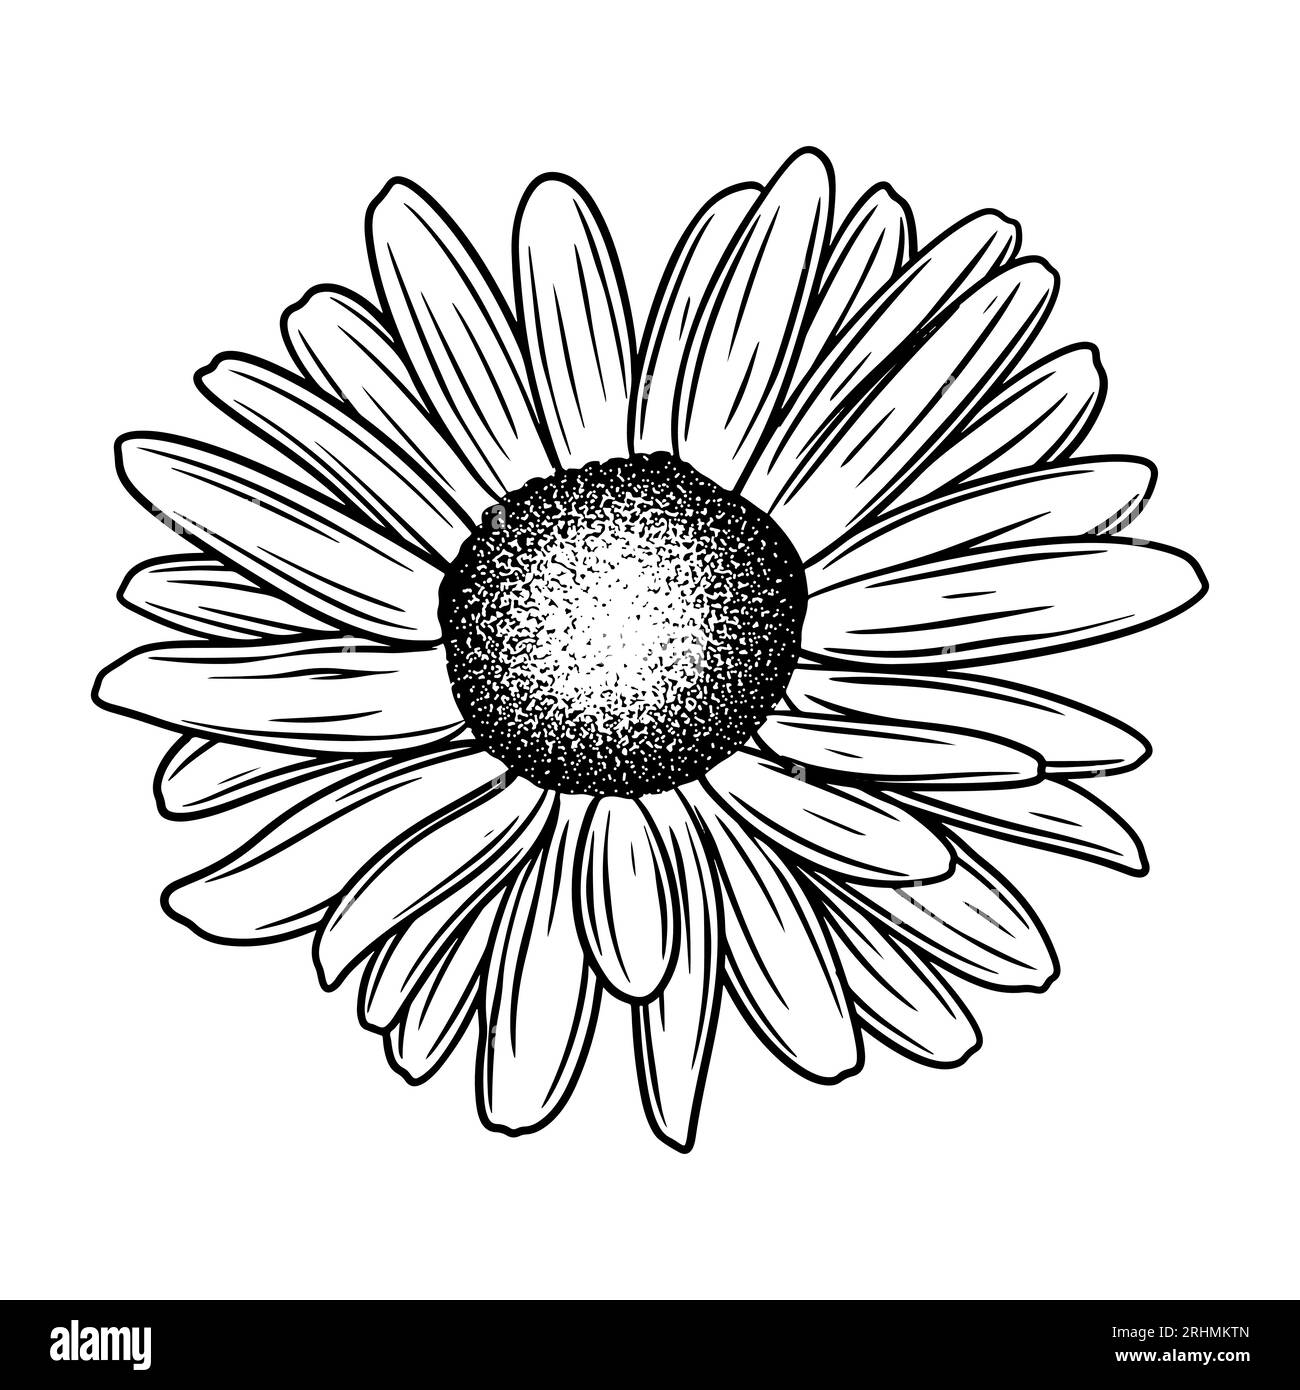 Hand drawn flower botanical drawing of daisy isolated on white background. Stock Vector